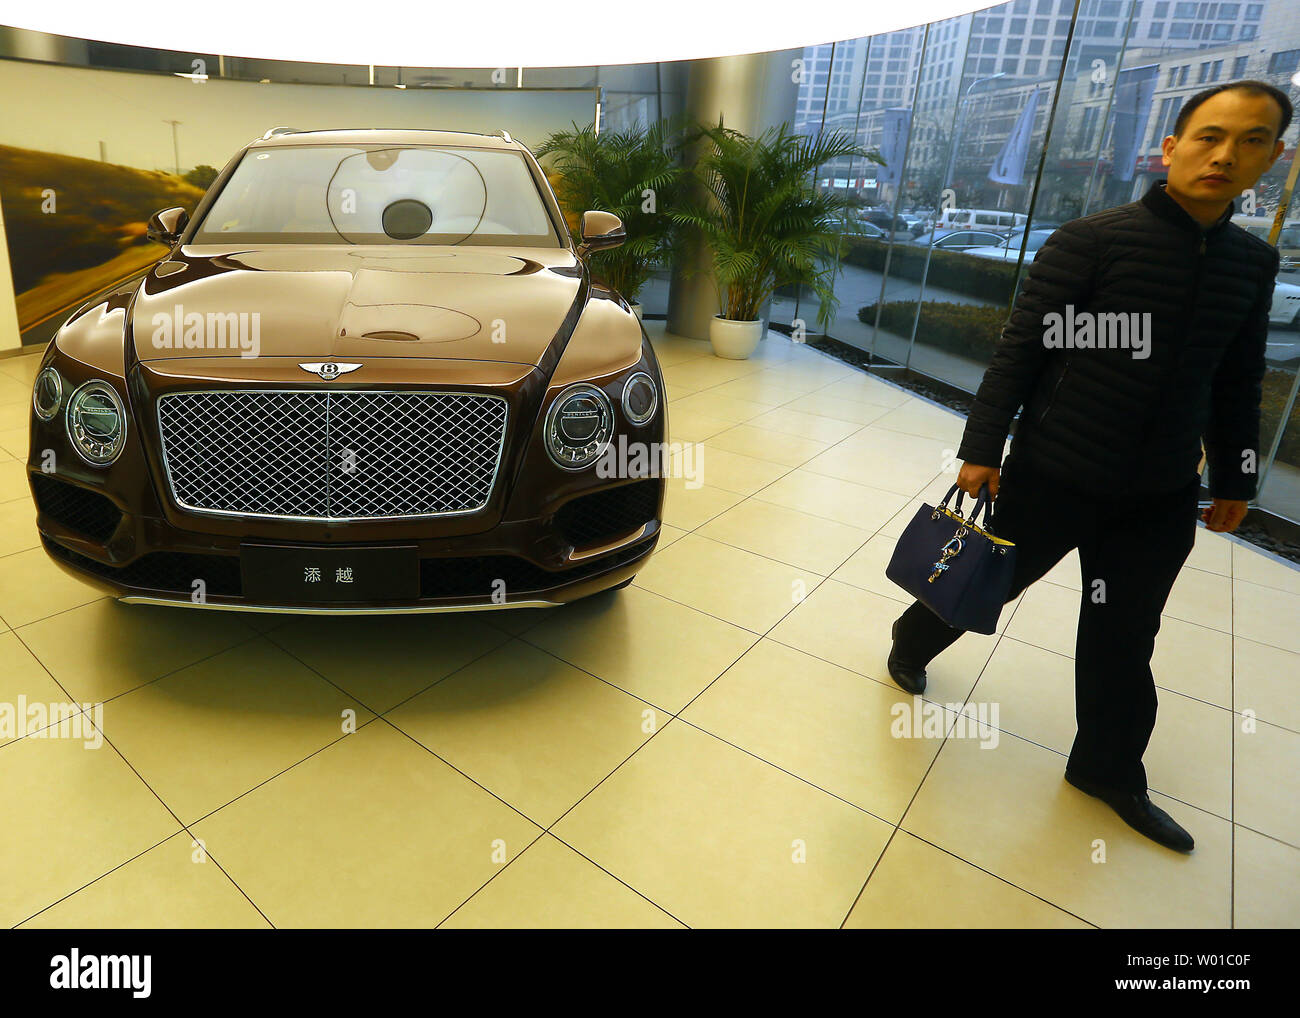 A Chinese man looks at new Bentleys in a showroom in downtown Beijing on December 3, 2016.  China has imposed a 10 percent tax on ultra high-end luxury cars costing over $190,000 such as Ferraris, Bentleys, Aston Martins, Maseratis, Lamborghinis and Rolls-Rocye cars in a nationwide crackdown on conspicuous consumption and graft, while promoting more fuel-efficient vehicles.         Photo by Stephen Shaver/UPI Stock Photo